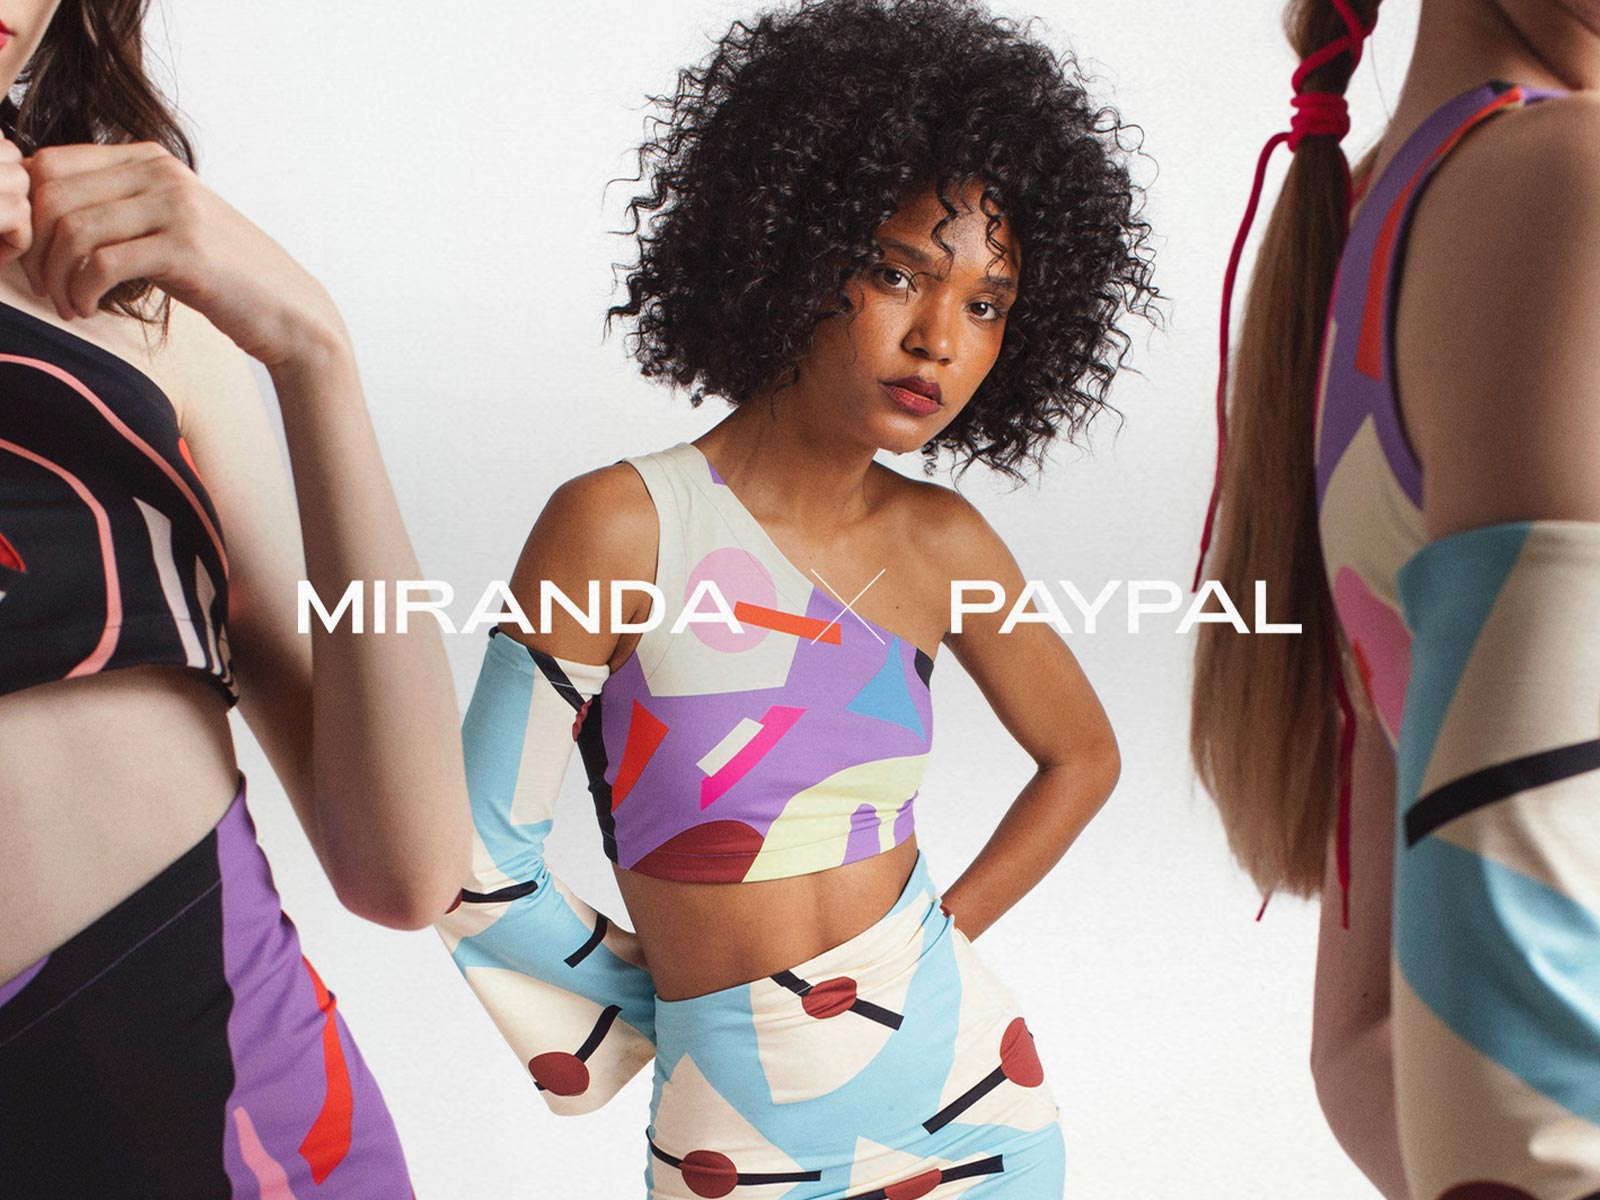 This is the new dress designed by Miranda Makaroff for PayPal Spain